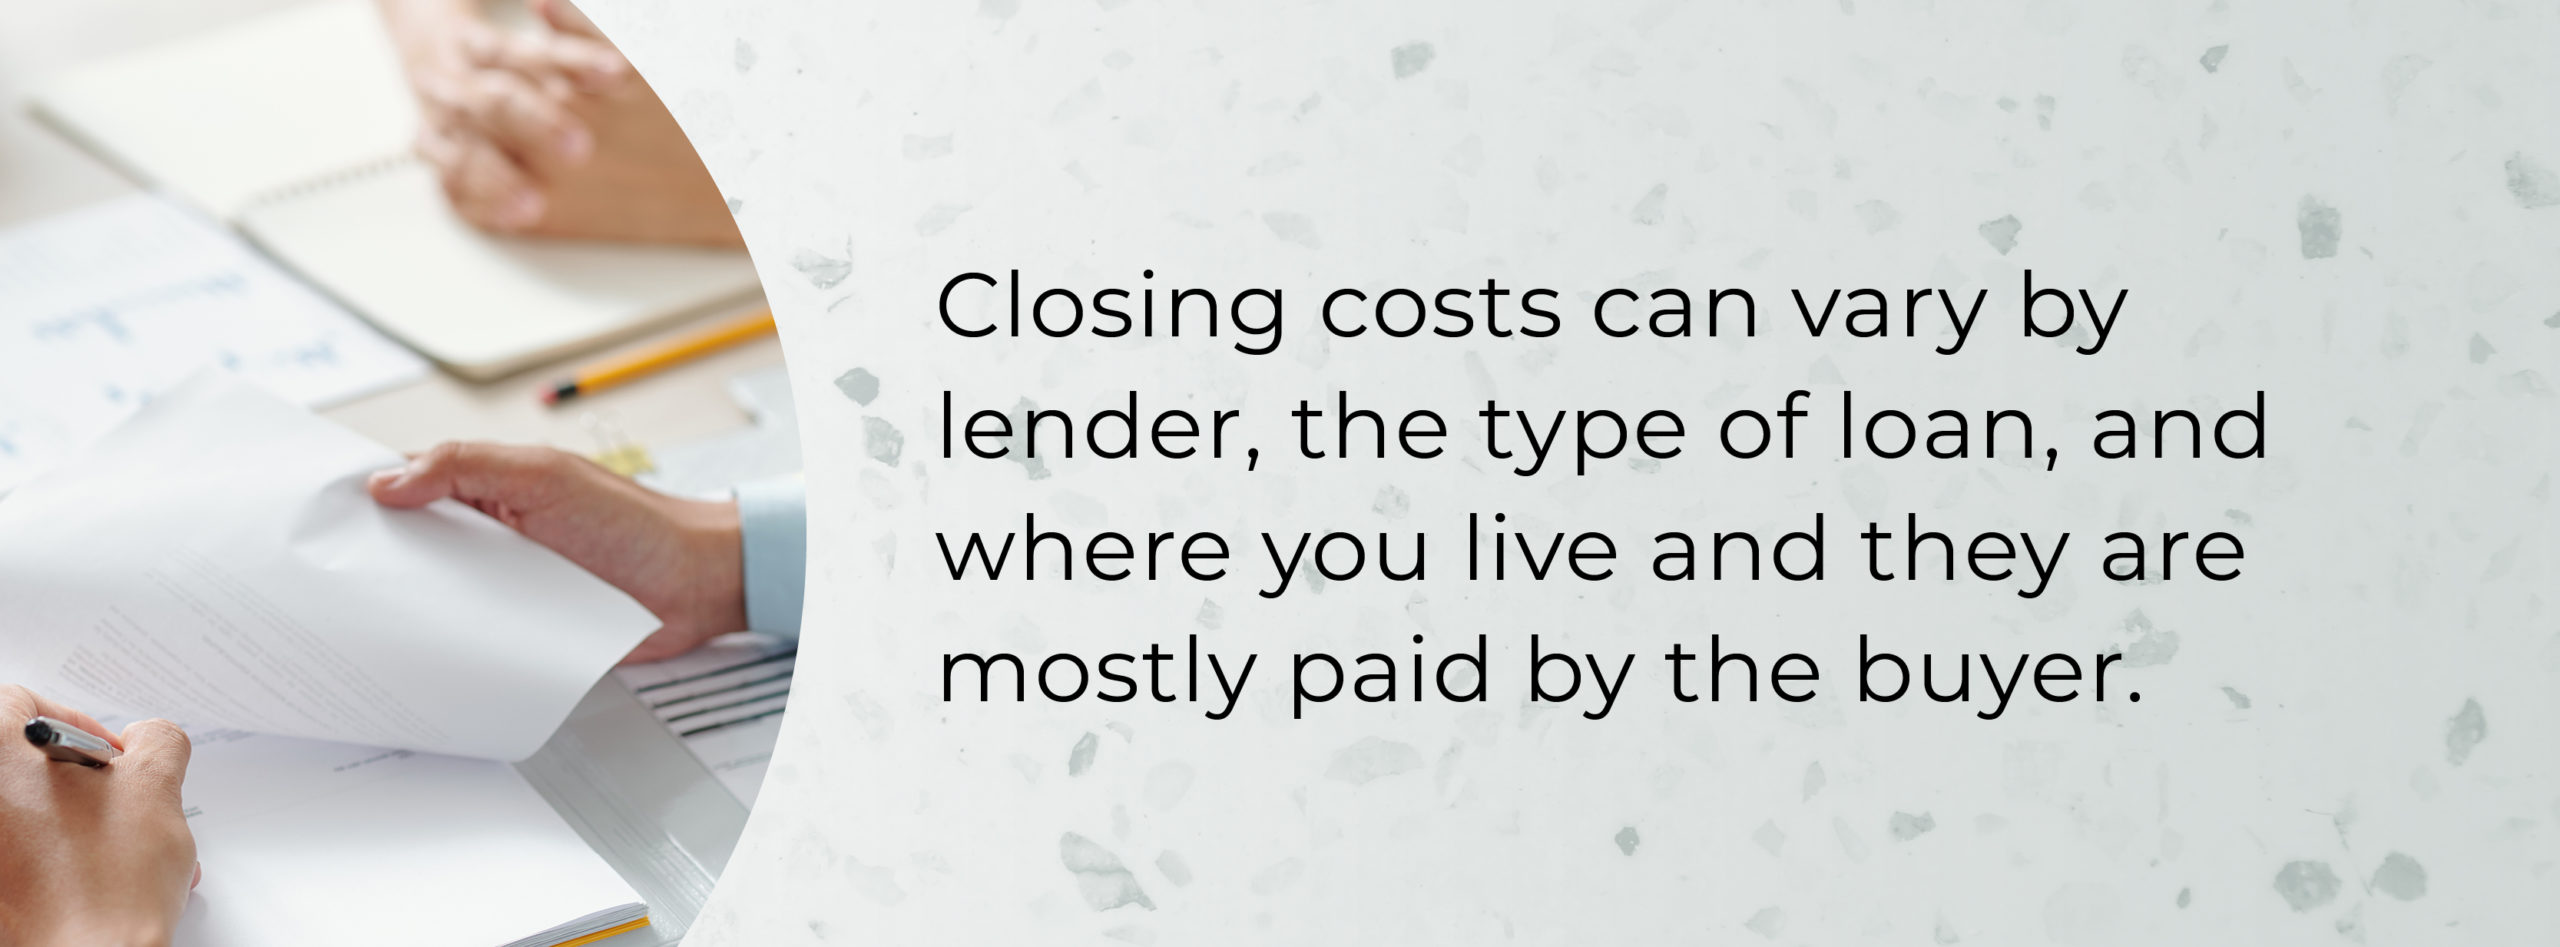 closing costs on a home can vary